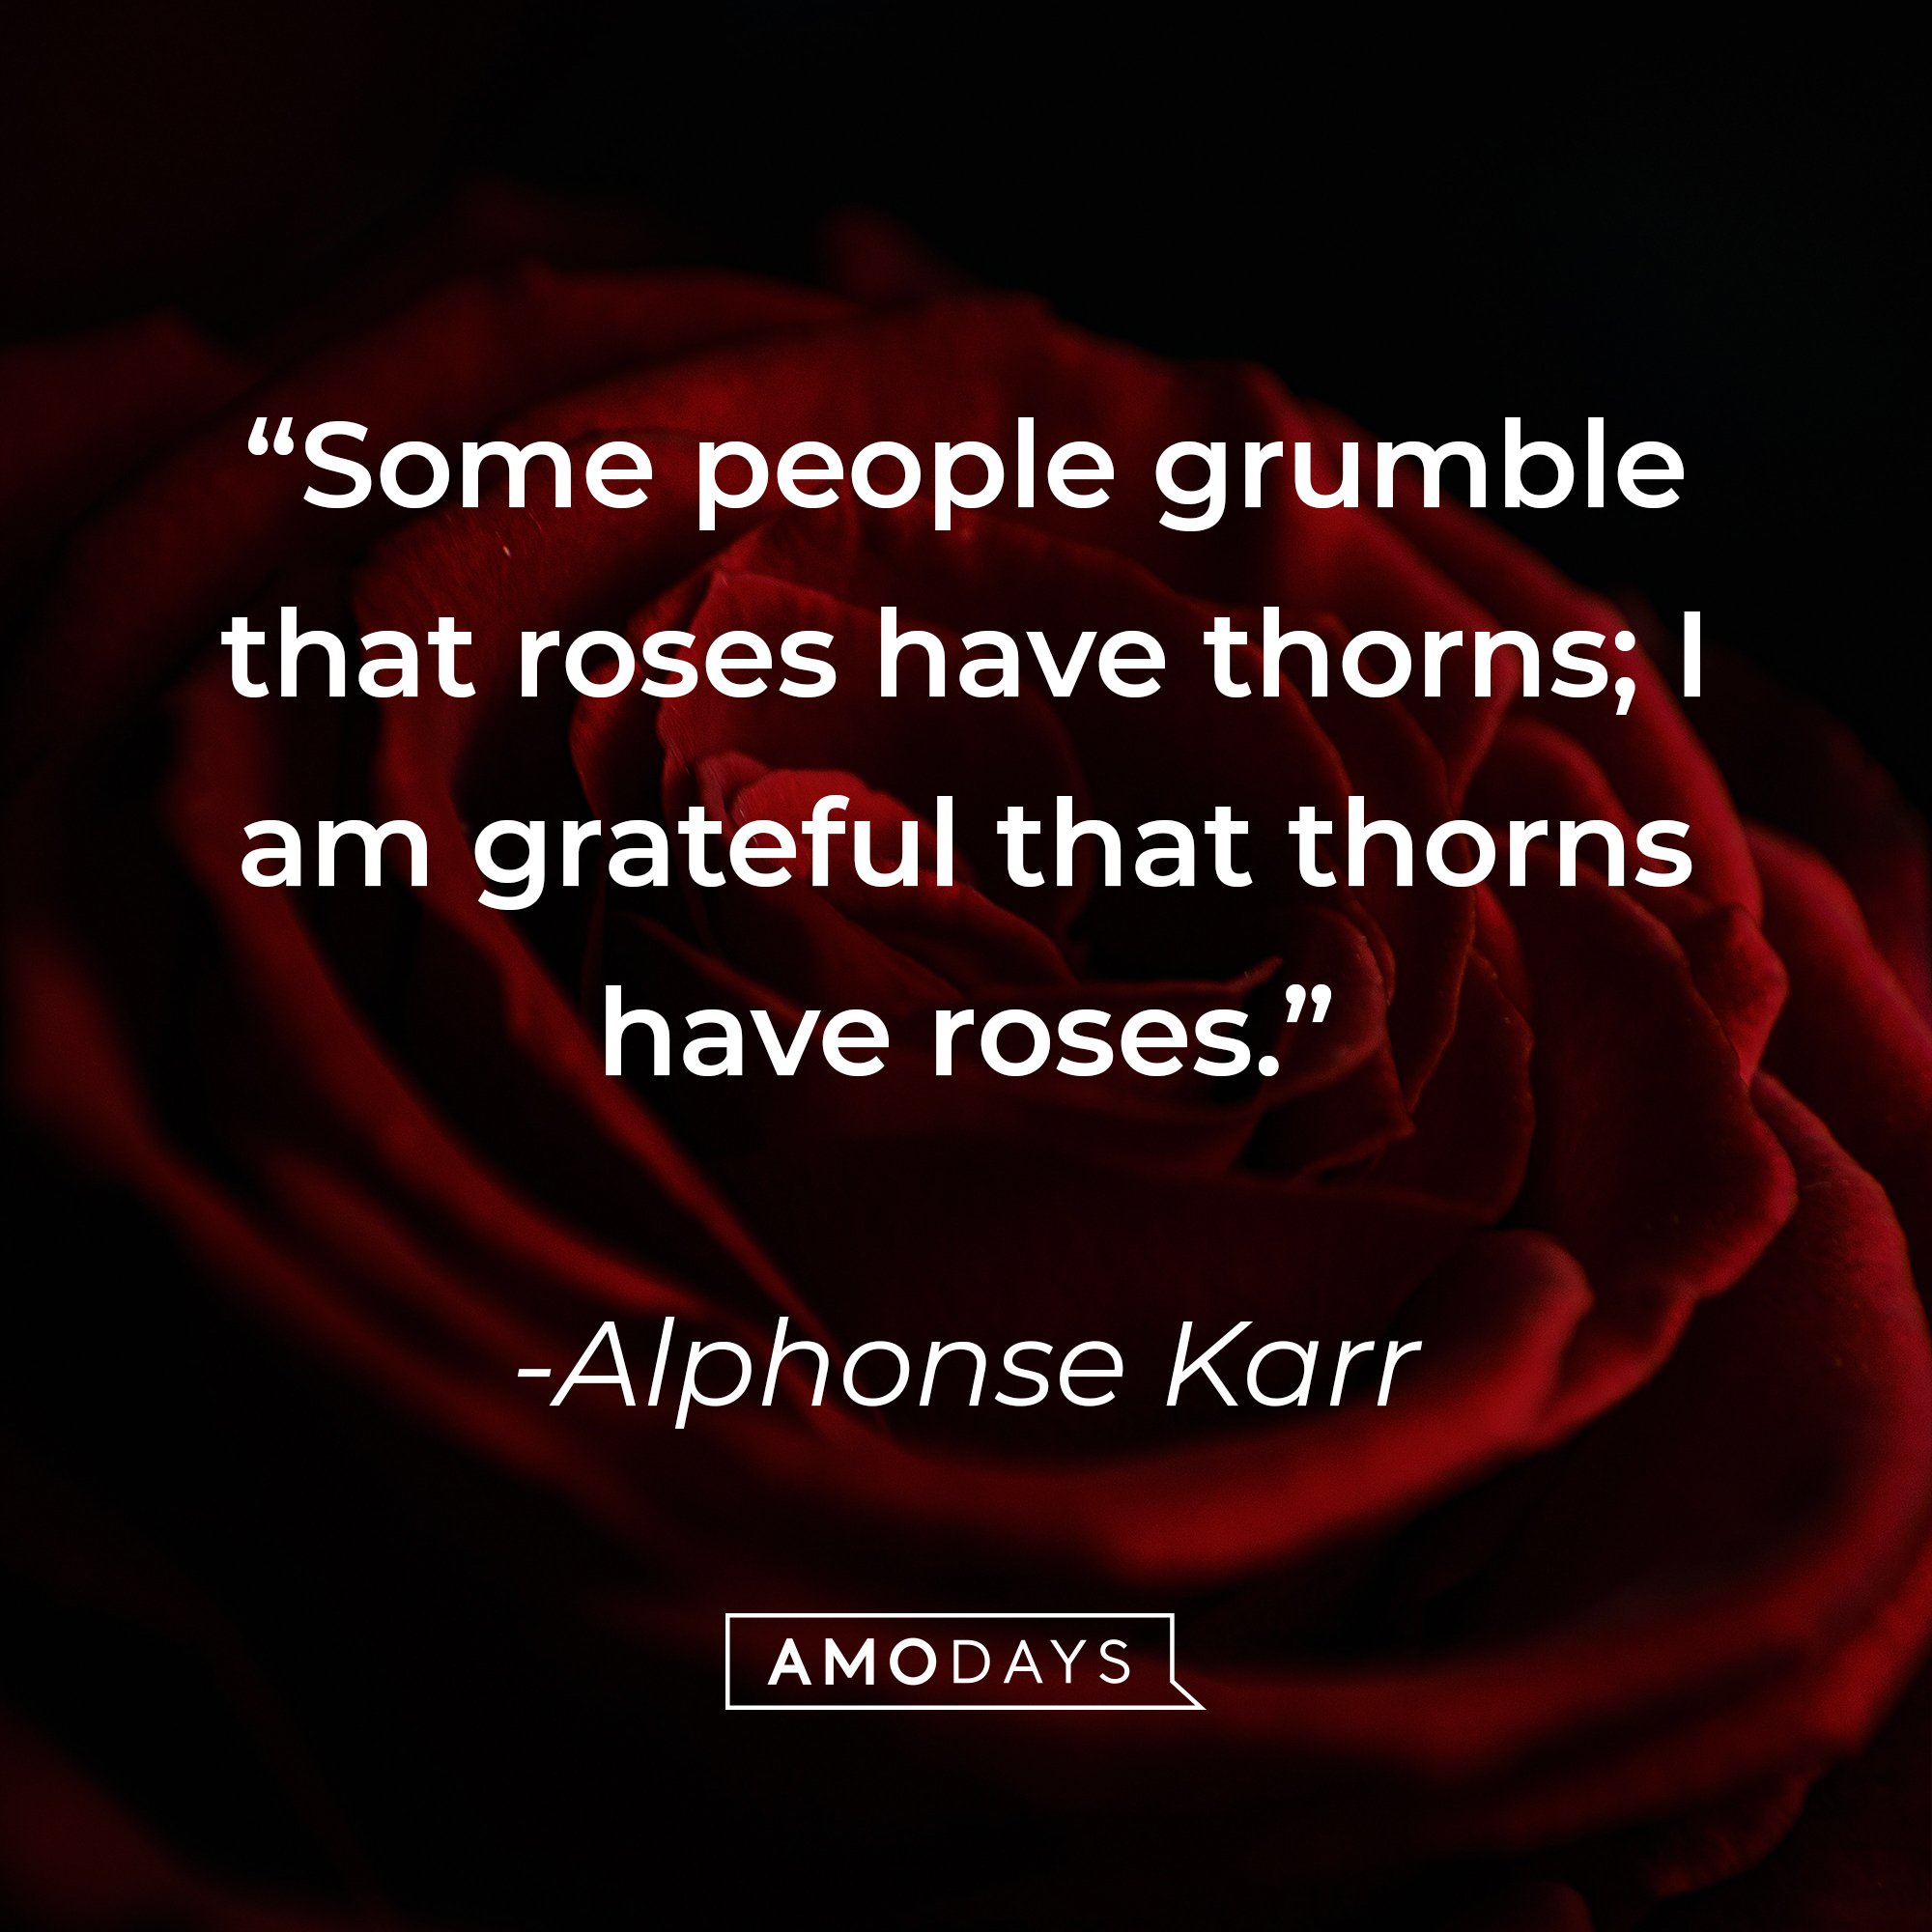 Alphonse Karr’s quote: “Some people grumble that roses have thorns; I am grateful that thorns have roses.” | Image: Amodays